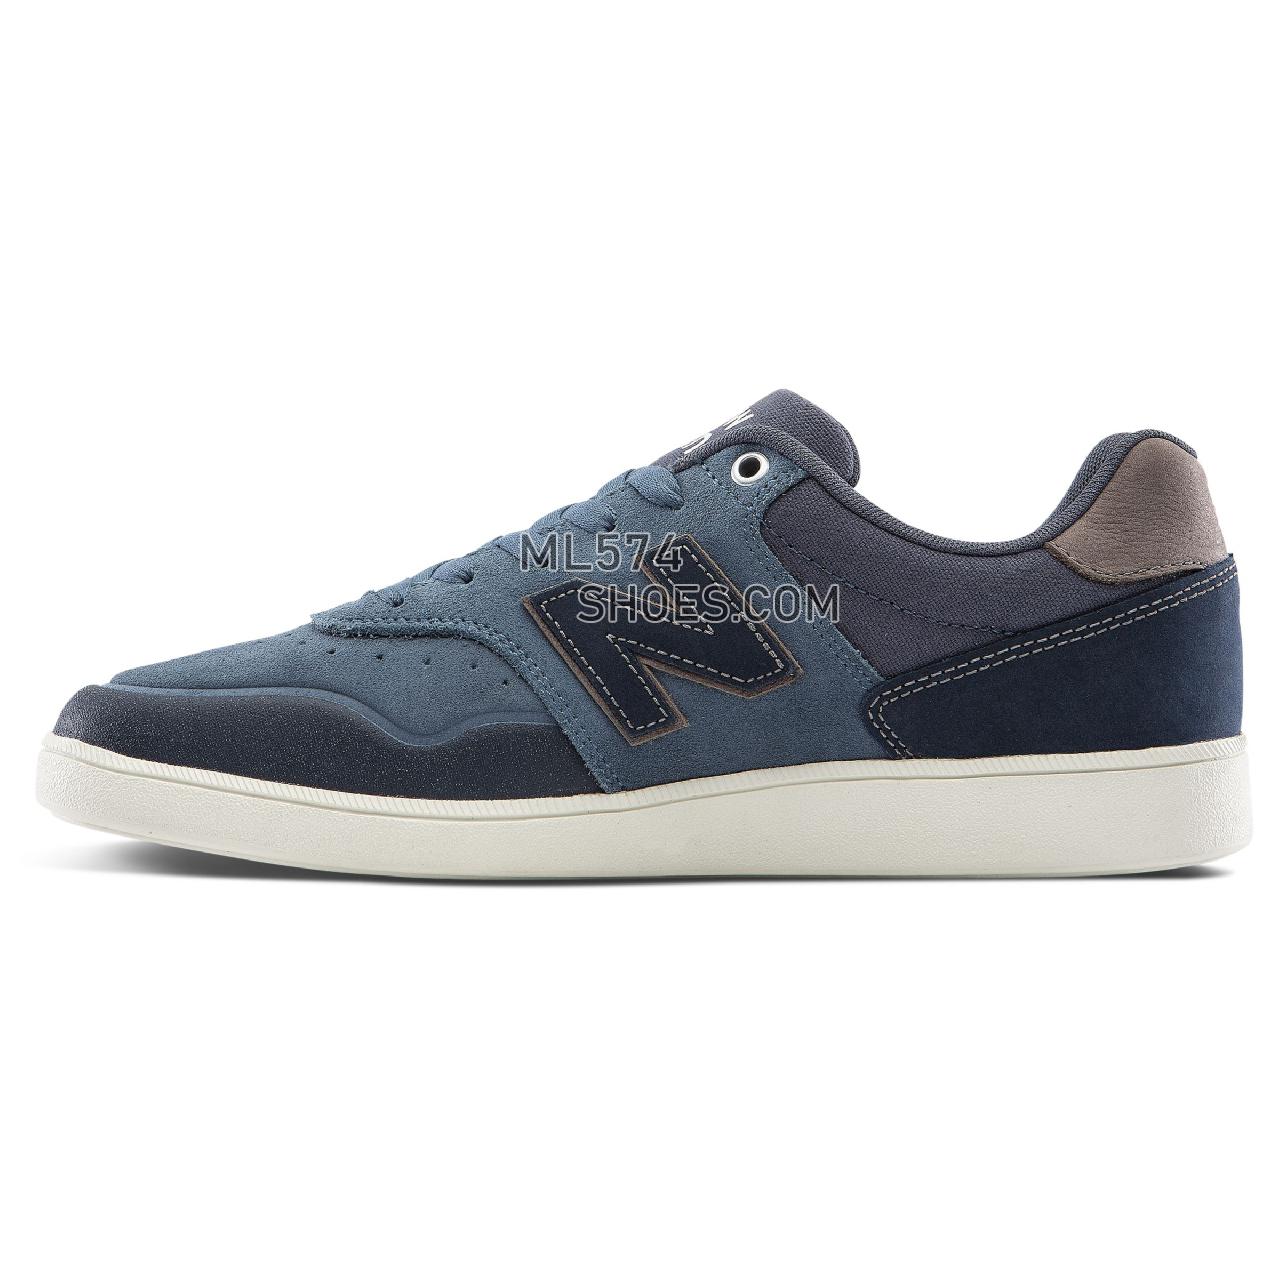 New Balance NM 288 - Men's 288 - Classic Blue with White - NM288ANK